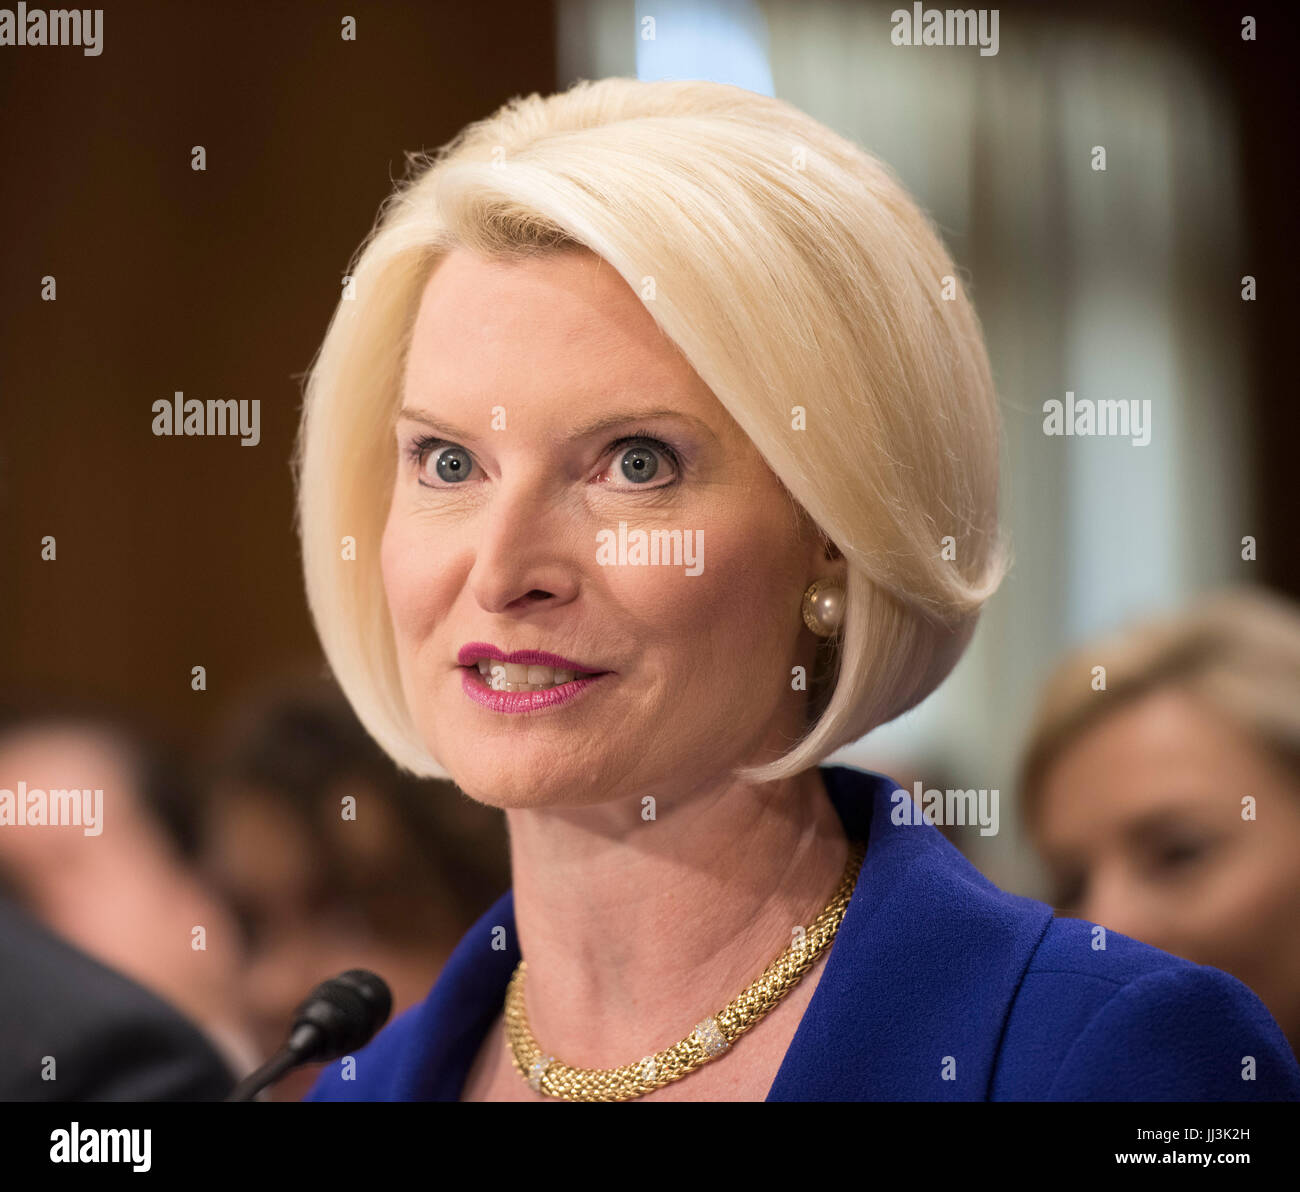 Washington DC, July 18, 2017, USA: Callista L Gngrich, wife for former Speaker of the House, Newt Gingrich, appears before the Senate Foreign Relations Committee to testify as to her ability to be the US Ambassador to the Holy See or the Vatican, in Washington DC. Patsy Lynch/MediaPunch Stock Photo